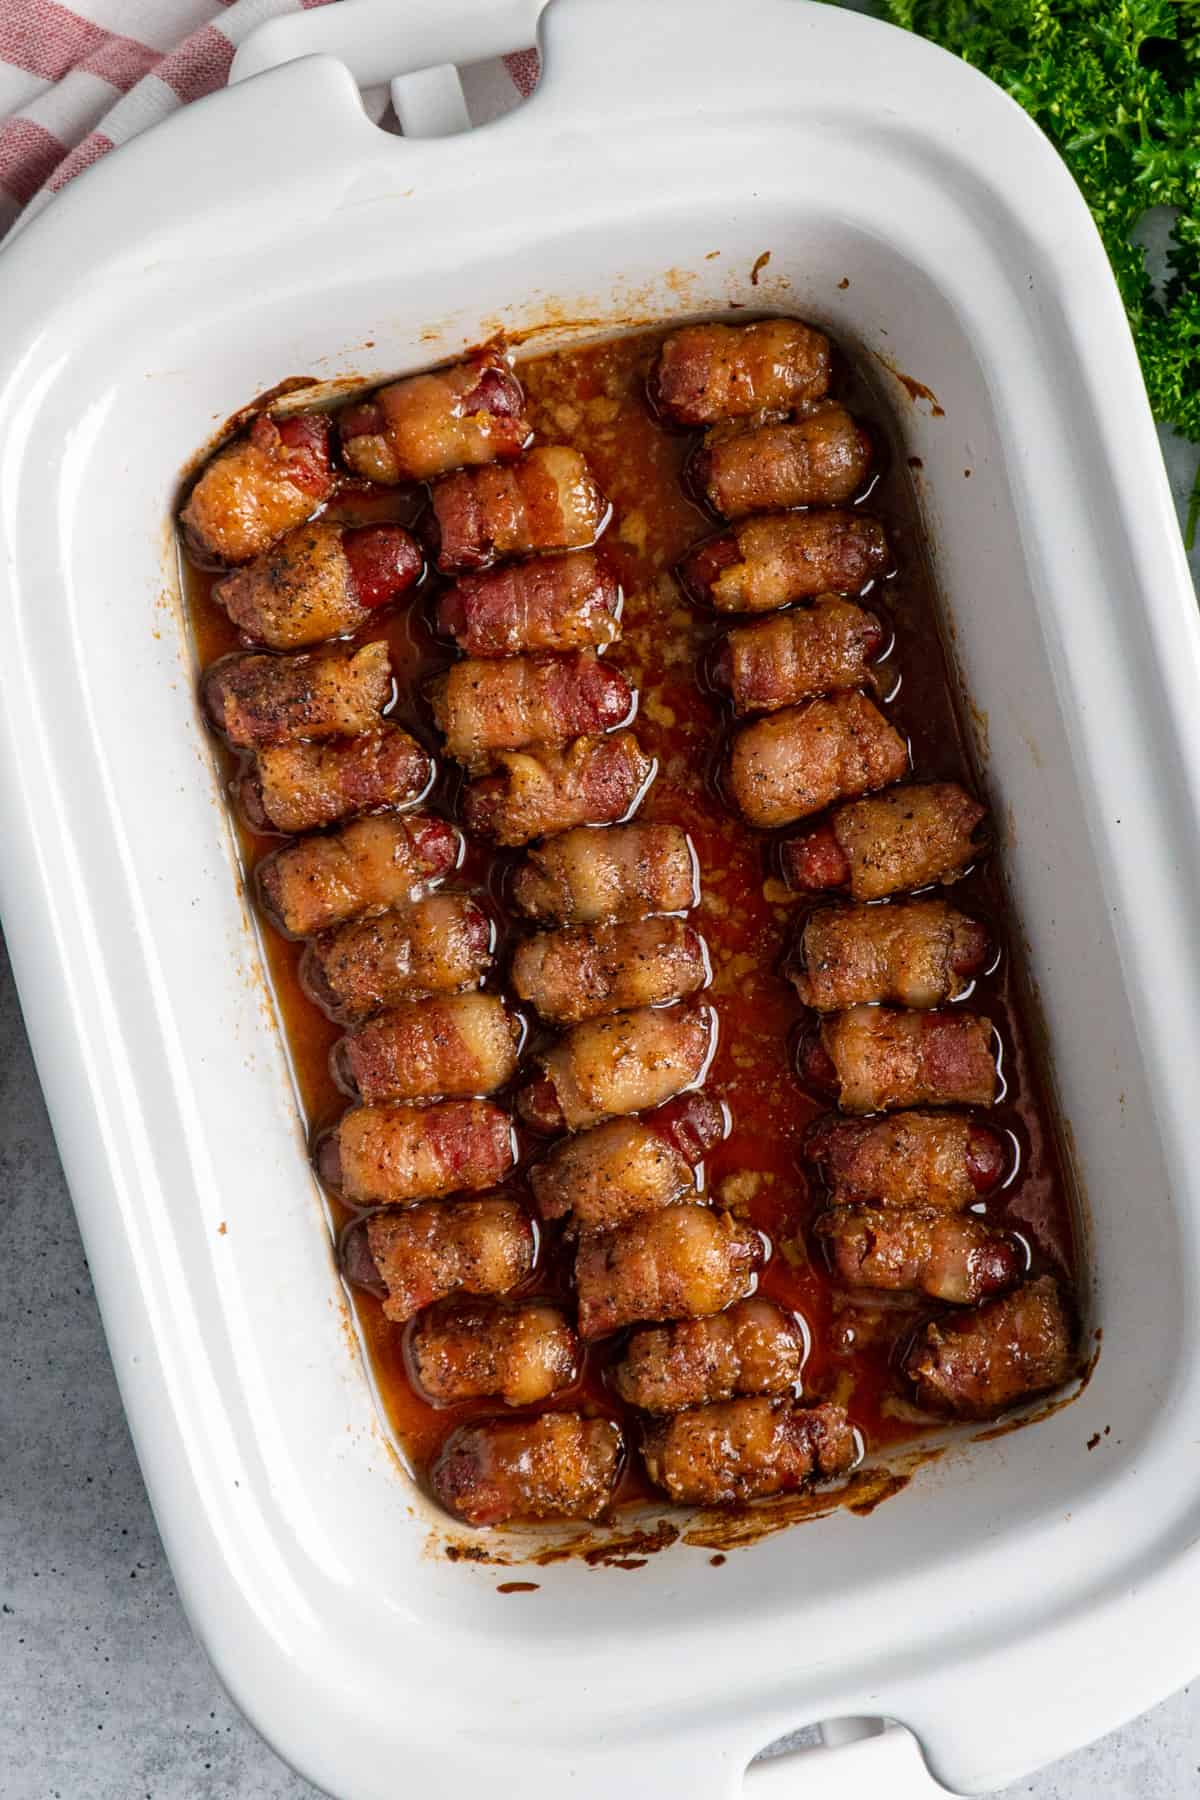 Bacon wrapped sausages in a white crock pot.